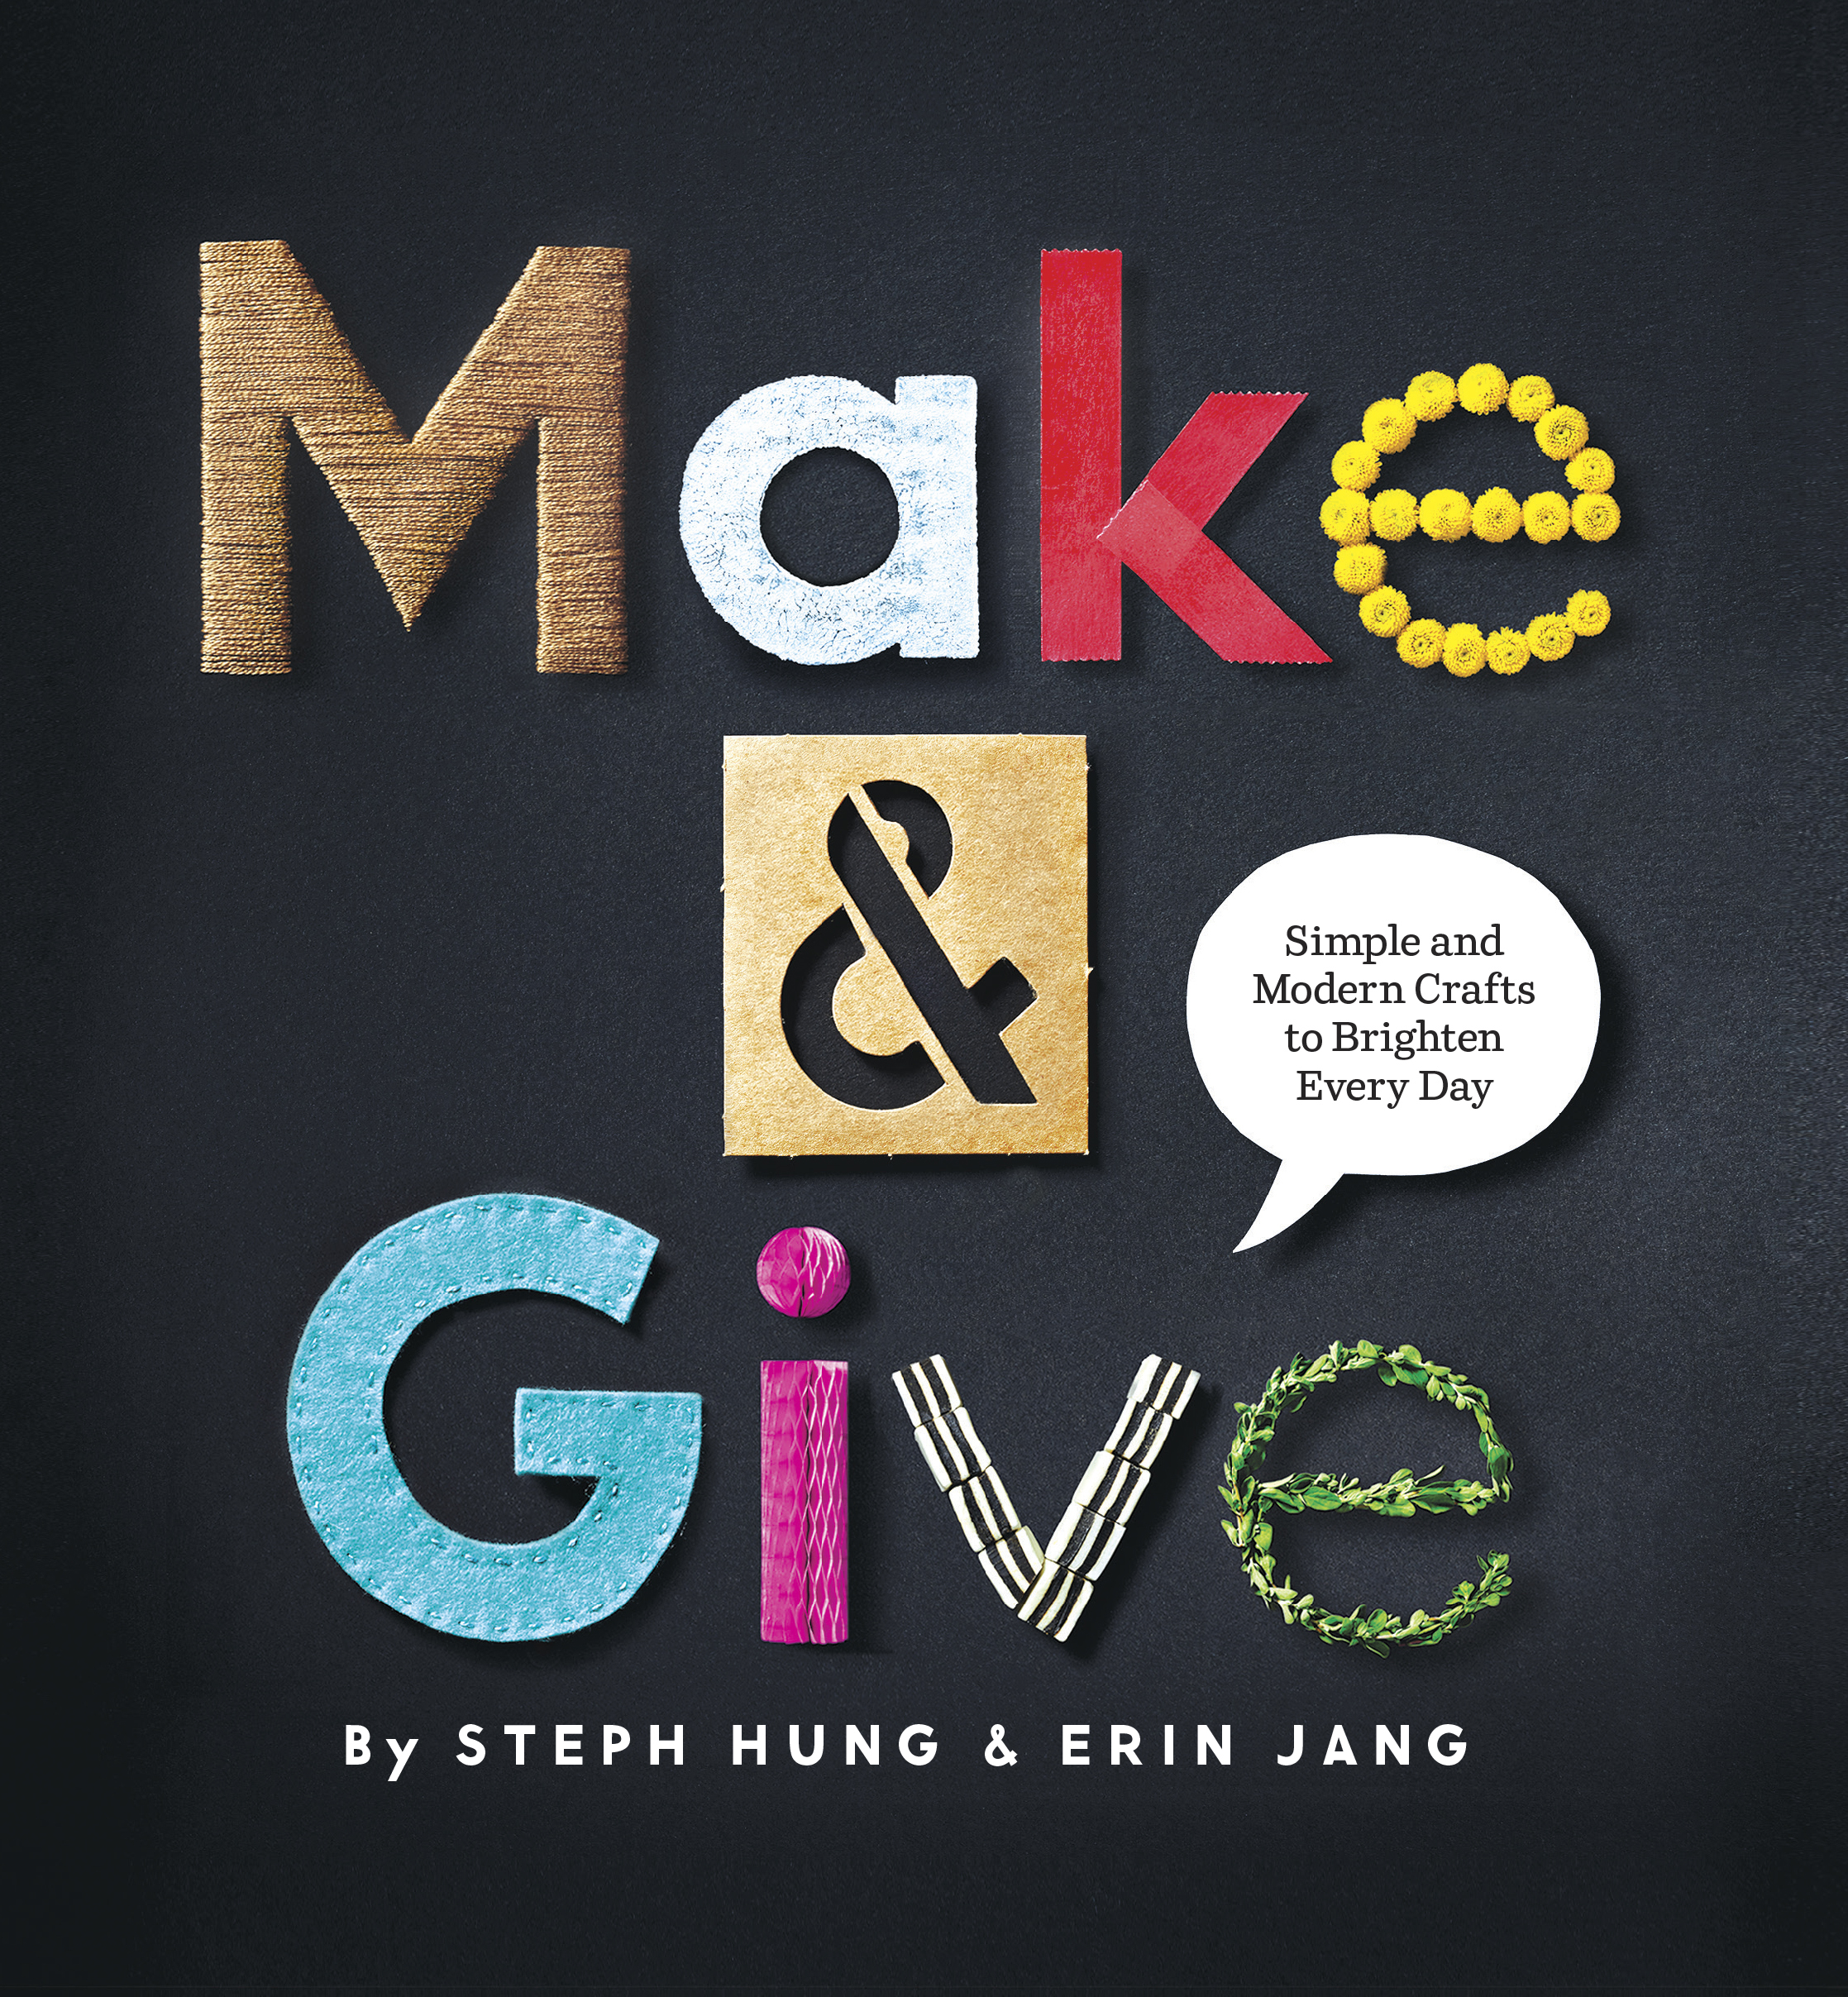 Book Launch: Make & Give by Steph Hung and Erin Jang